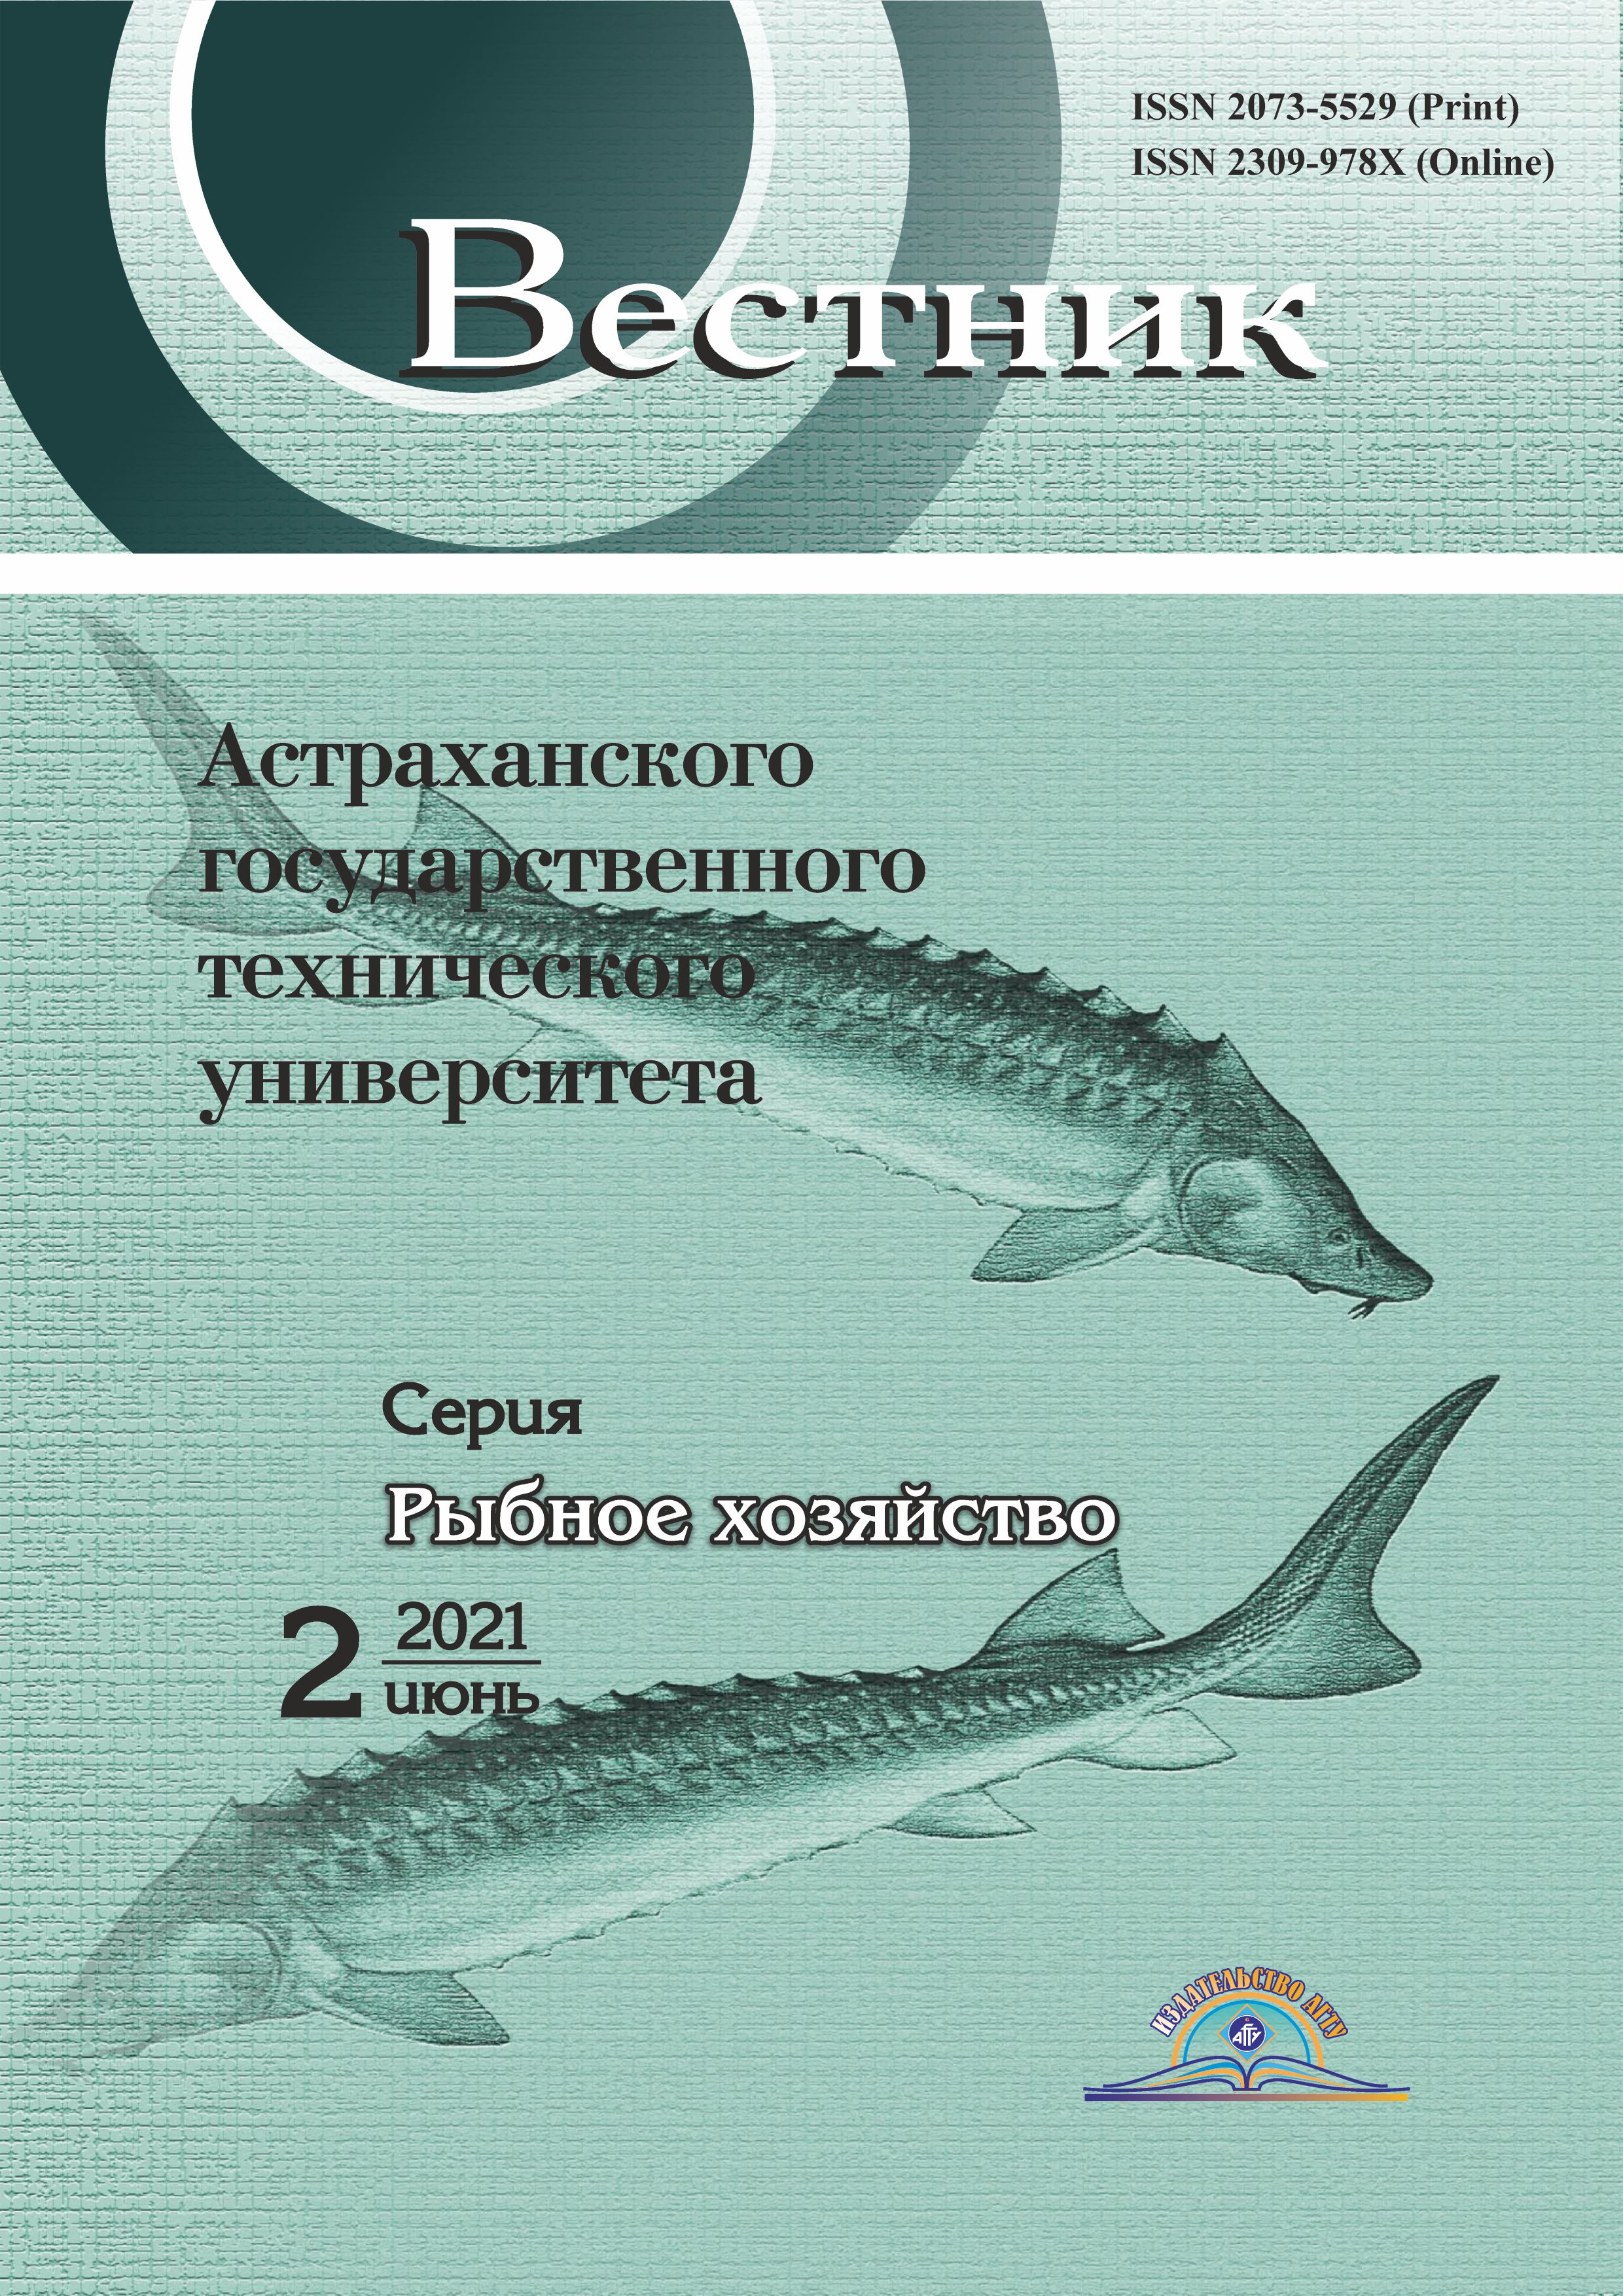                         COEFFICIENTS OF ACCUMULATING CHEMICAL ELEMENTS  IN ORGANS AND TISSUES OF RUSSIAN (ACIPENSER GUELDENSTAEDTII, BRANDT, 1833)  AND PERSIAN (ACIPENSER PERSICUS, BORODIN, 1897) STURGEONS OF CASPIAN SEA
            